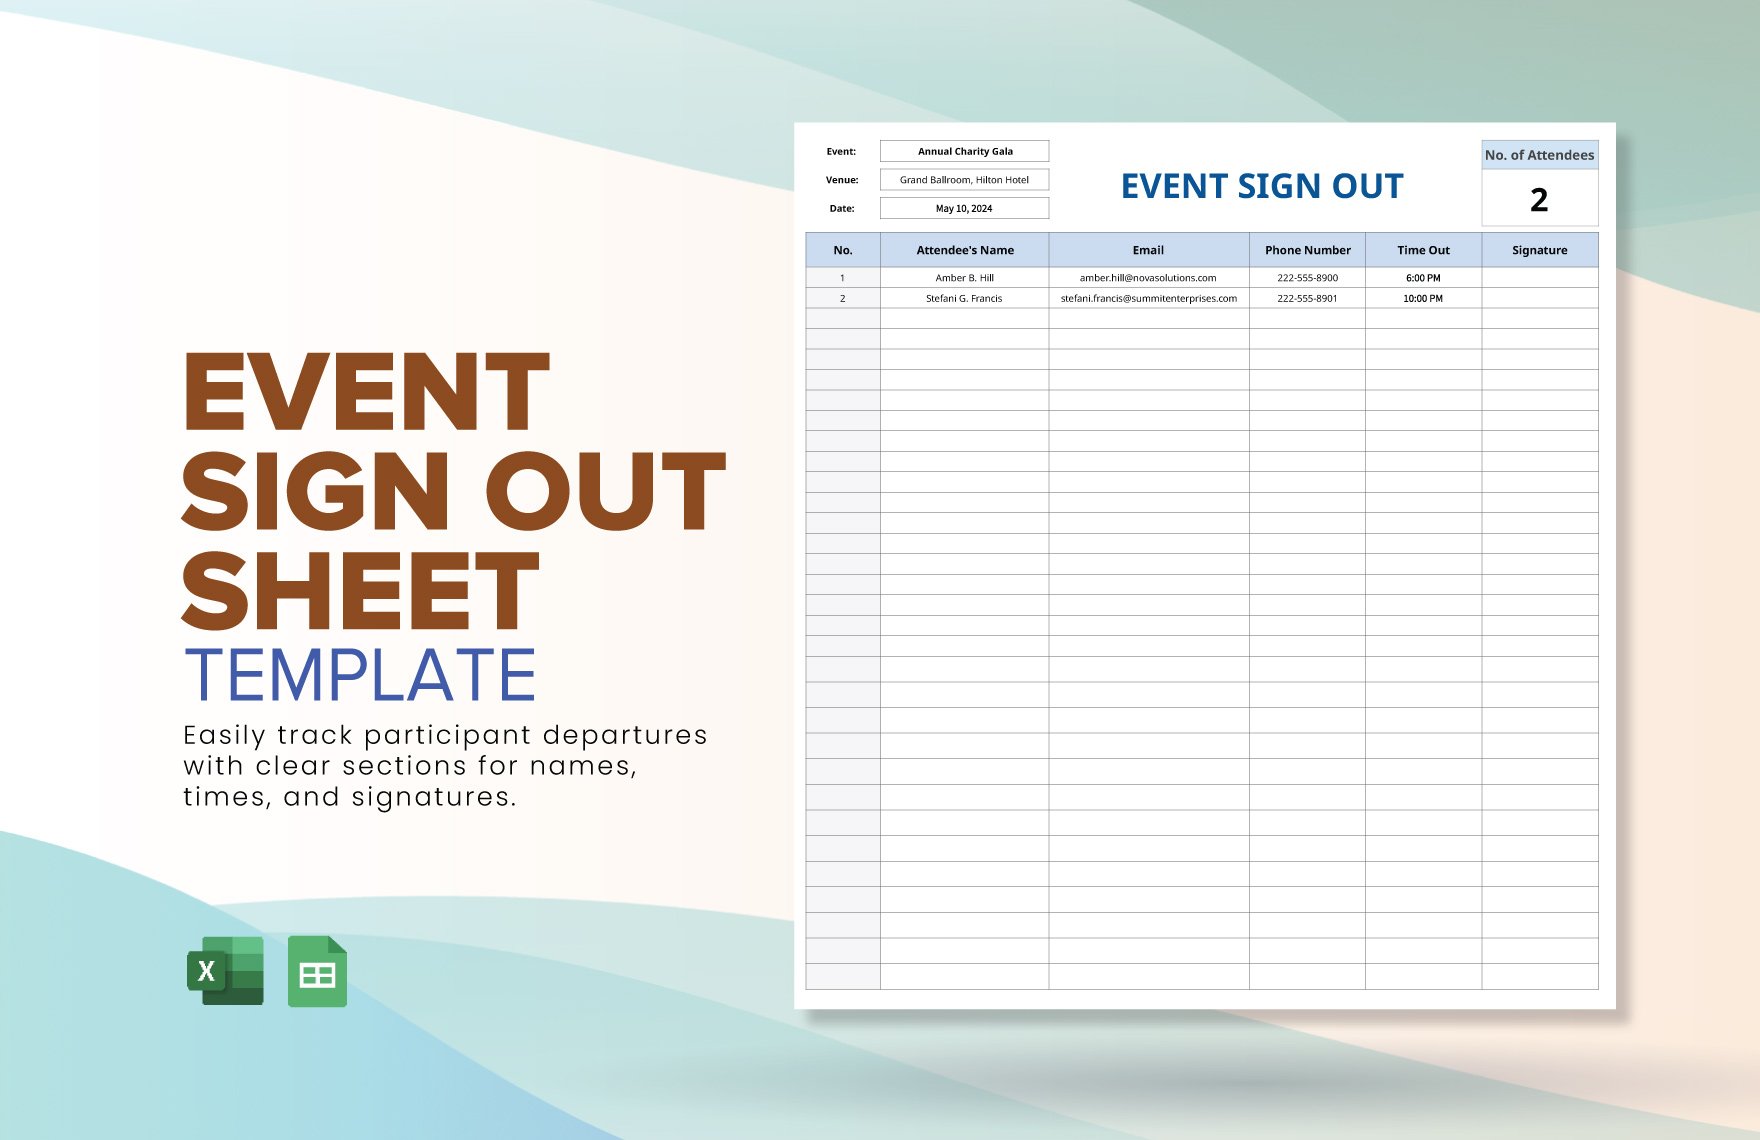 Event Sign Out Sheet Template in Excel, Google Sheets